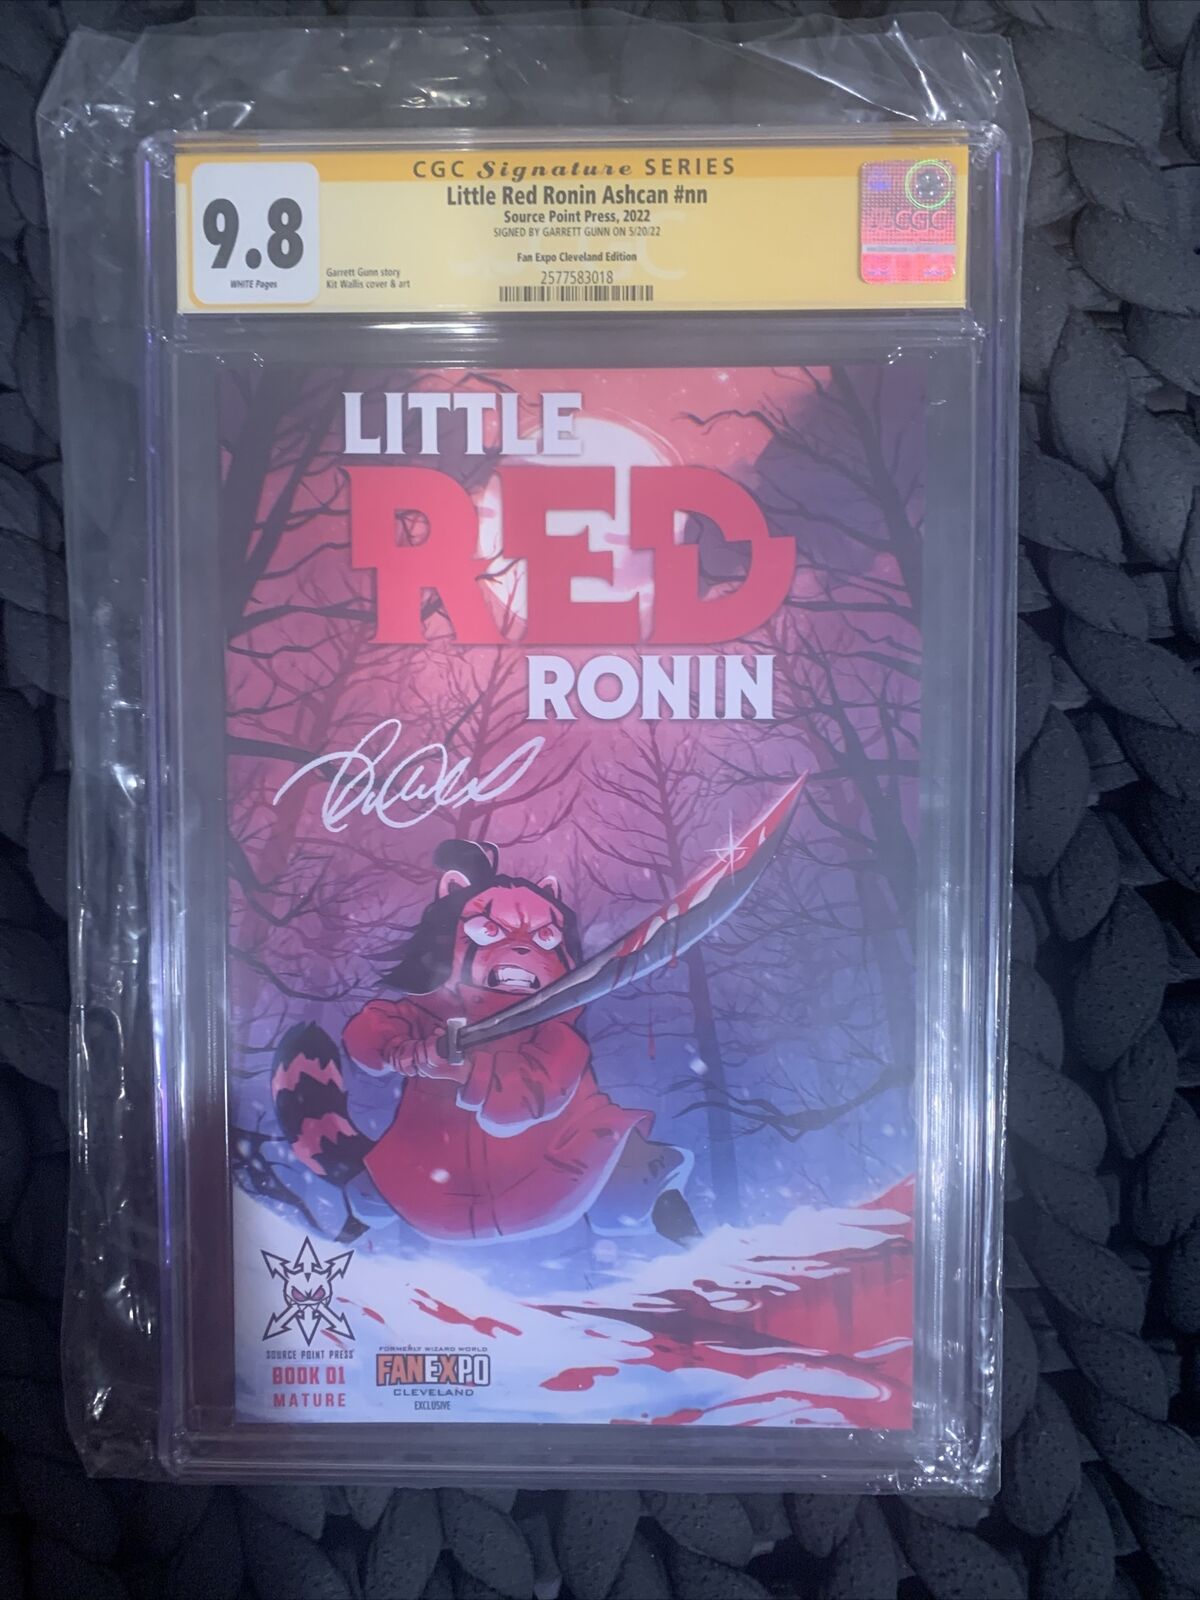 Little Red Ronin Ashcan Fan Expo Cleveland Exclusive Variant CGC 9.8 Signed Gunn